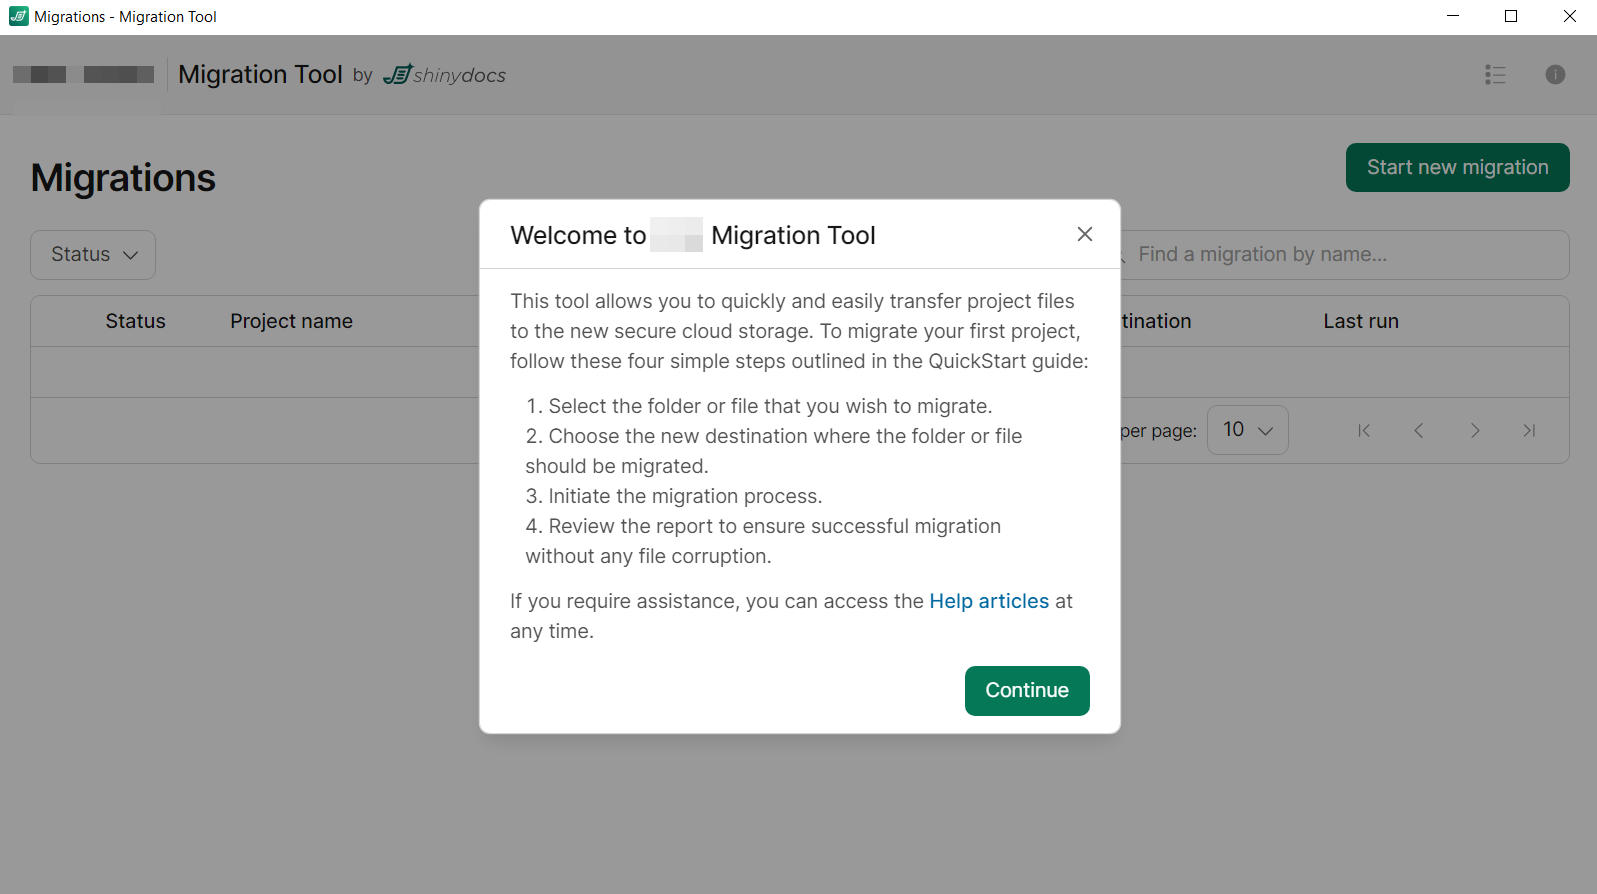 Migration Tool home page